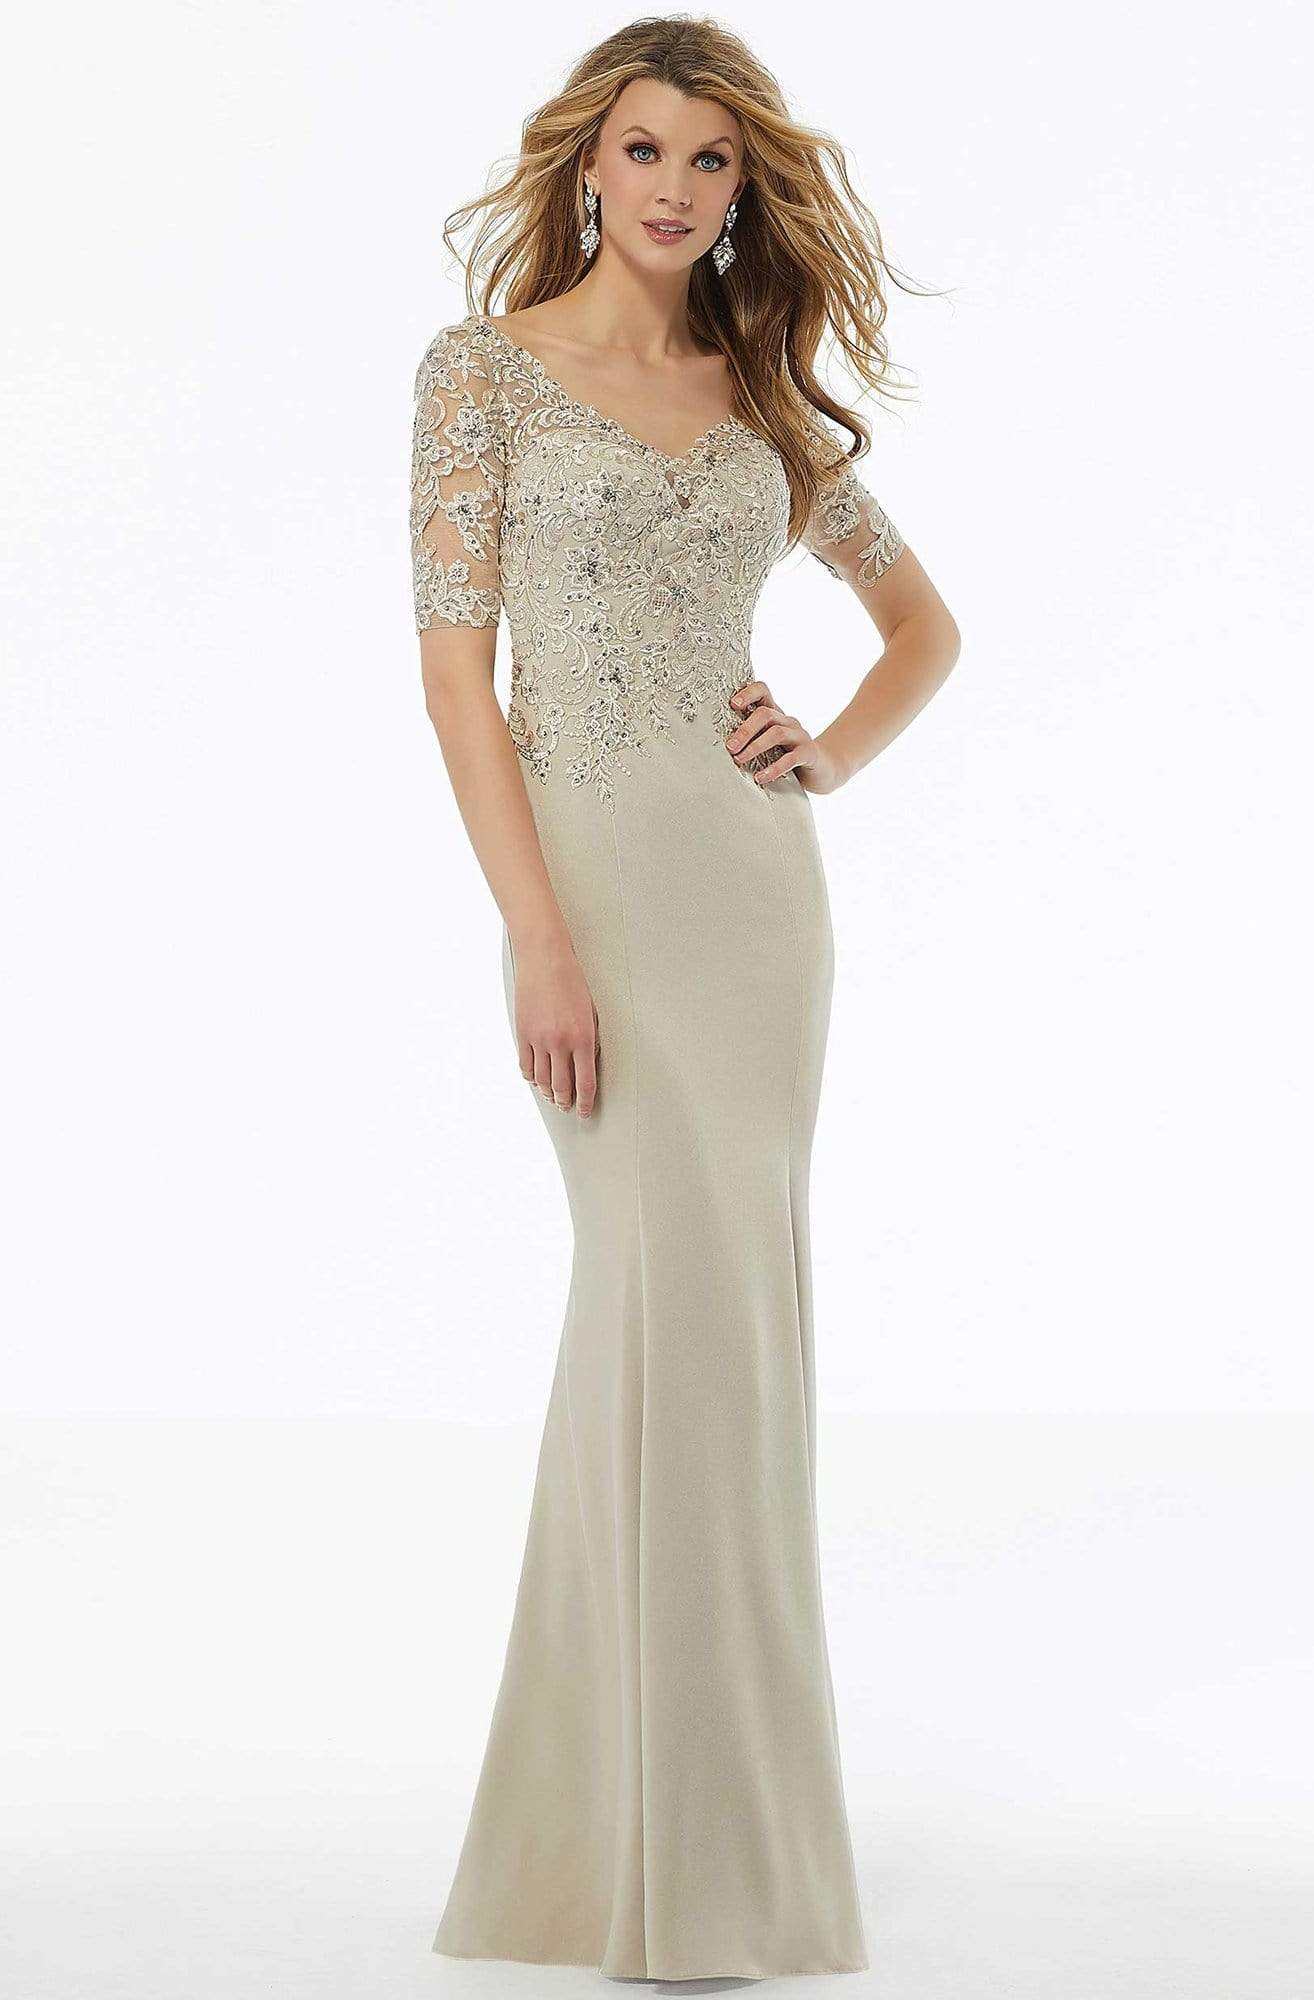 MGNY By Mori Lee - 72108 Beaded Lace Crepe Sheath Dress Mother of the Bride Dresses 2 / Champagne